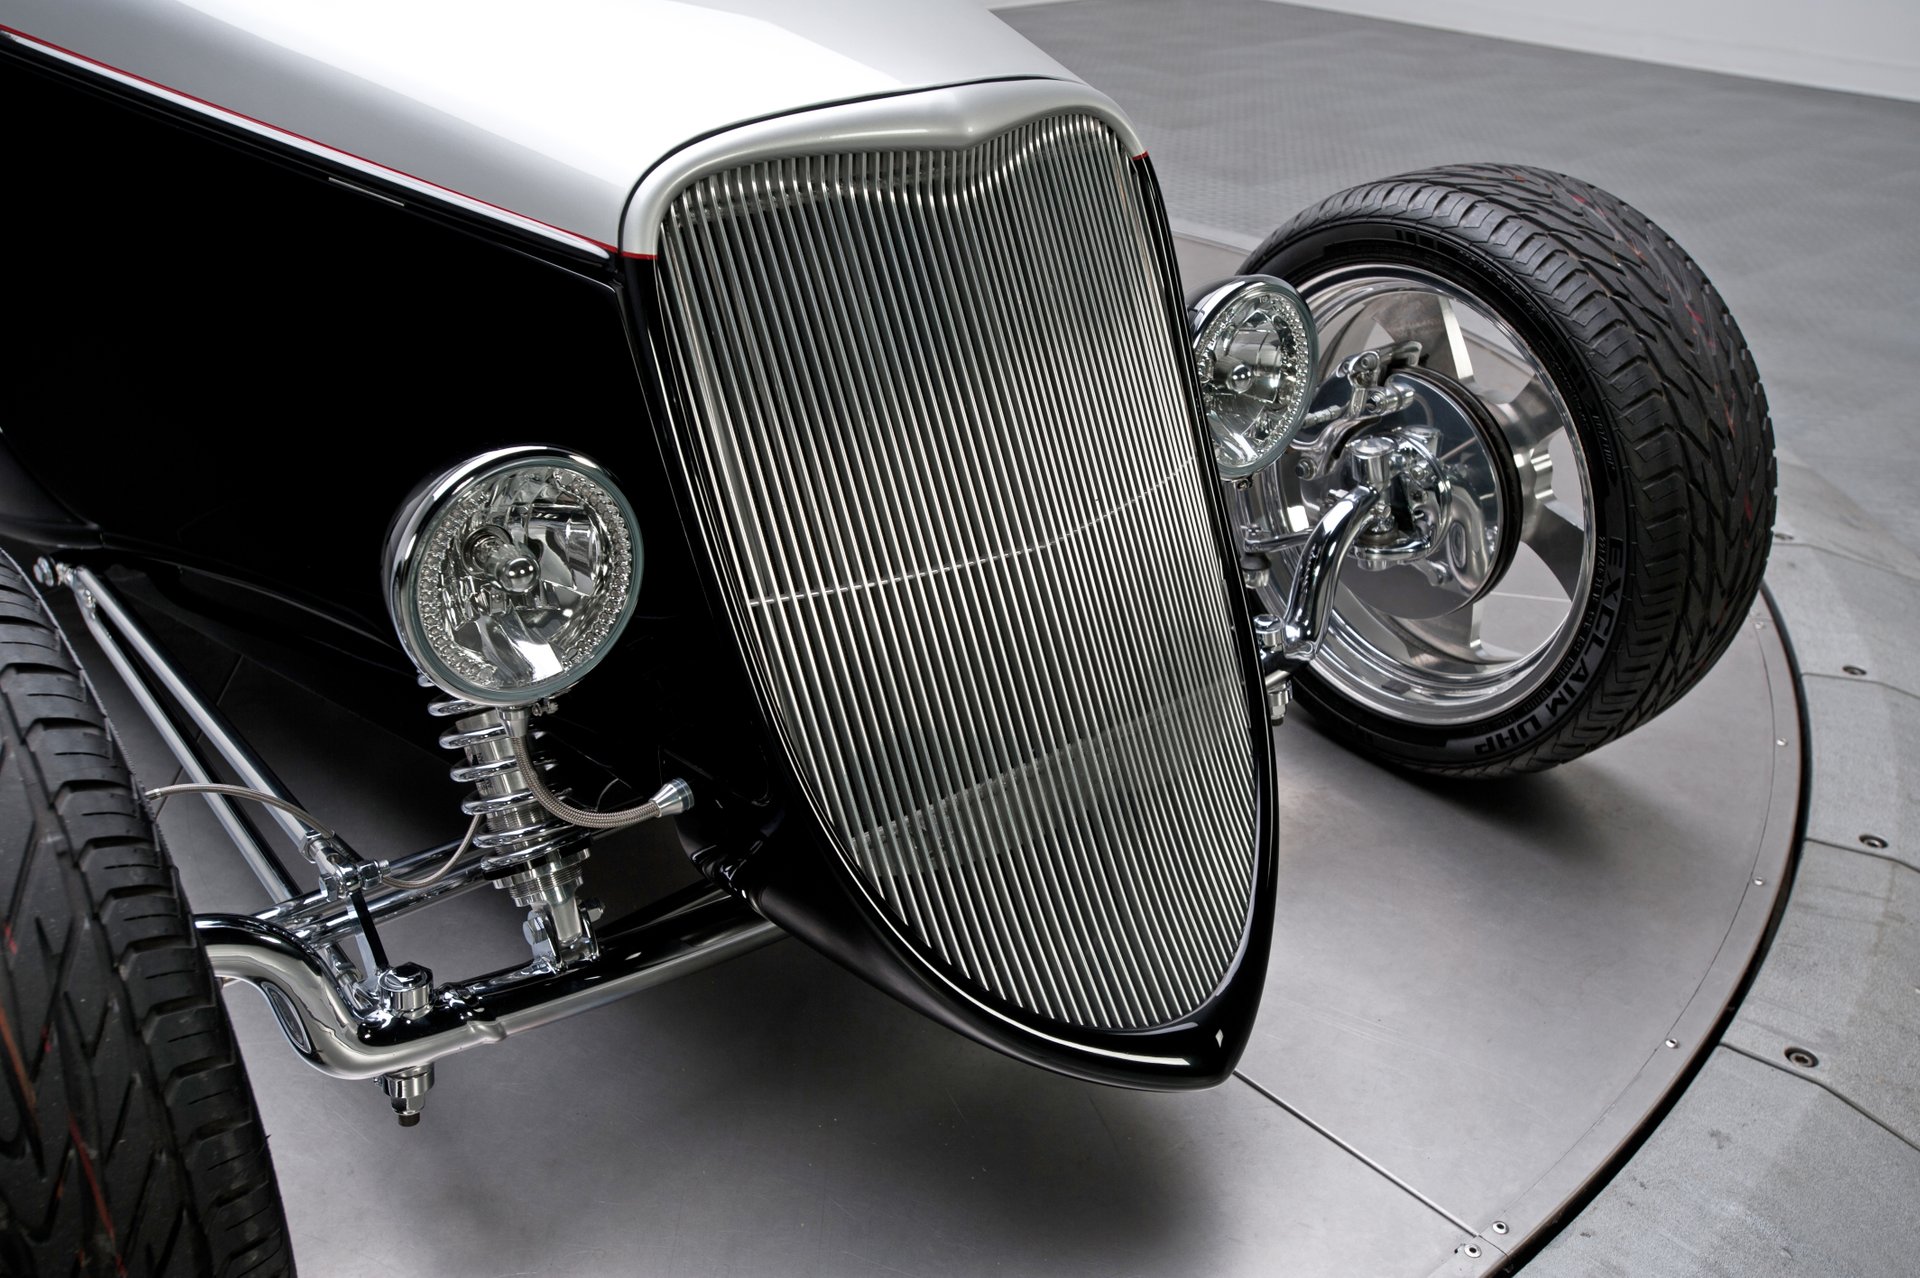 For Sale 1933 Ford Roadster